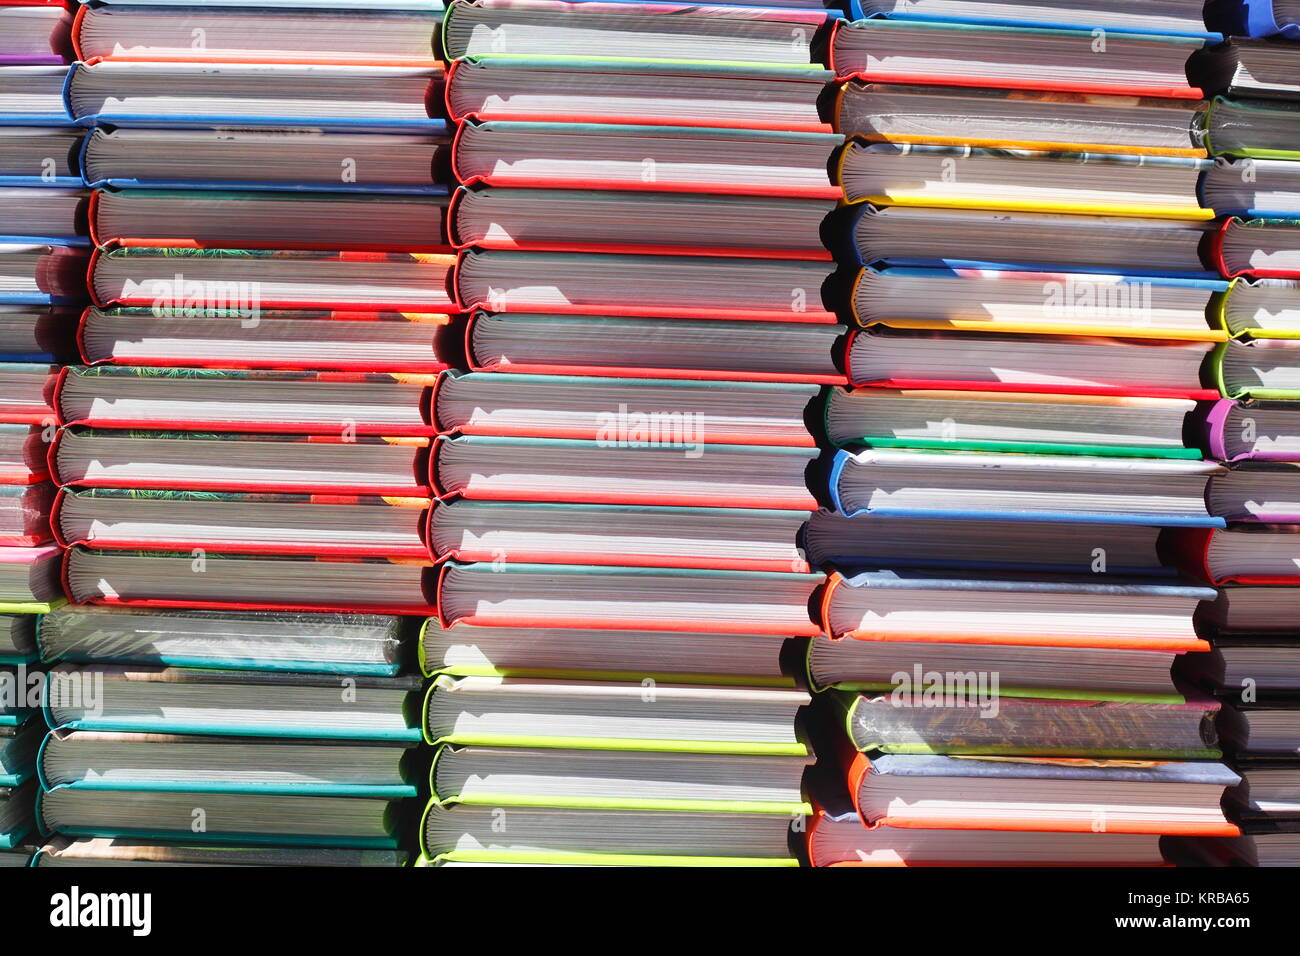 situated stacked books Stock Photo